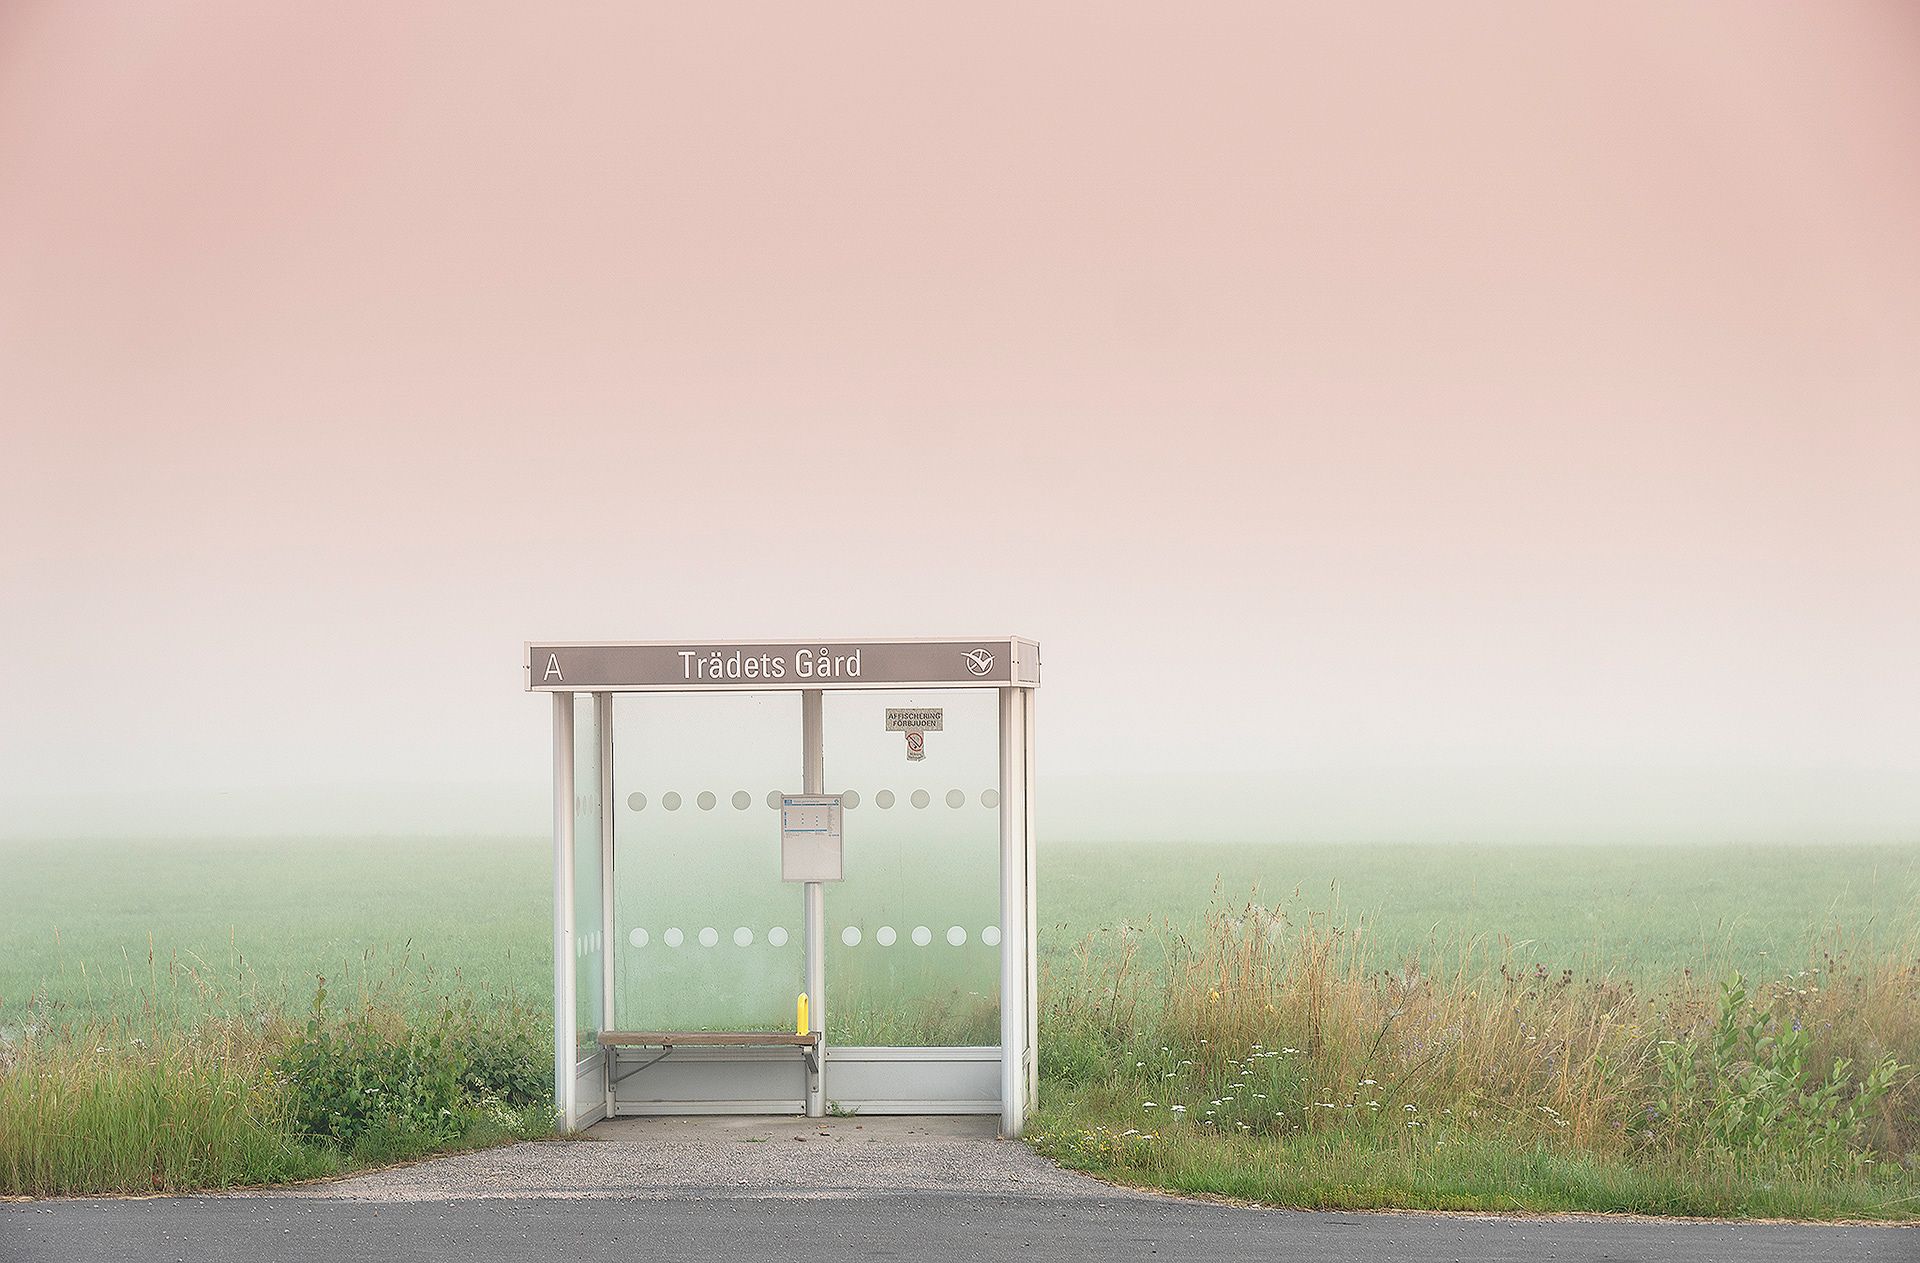 A phone booth sitting in the middle of nowhere - Danish